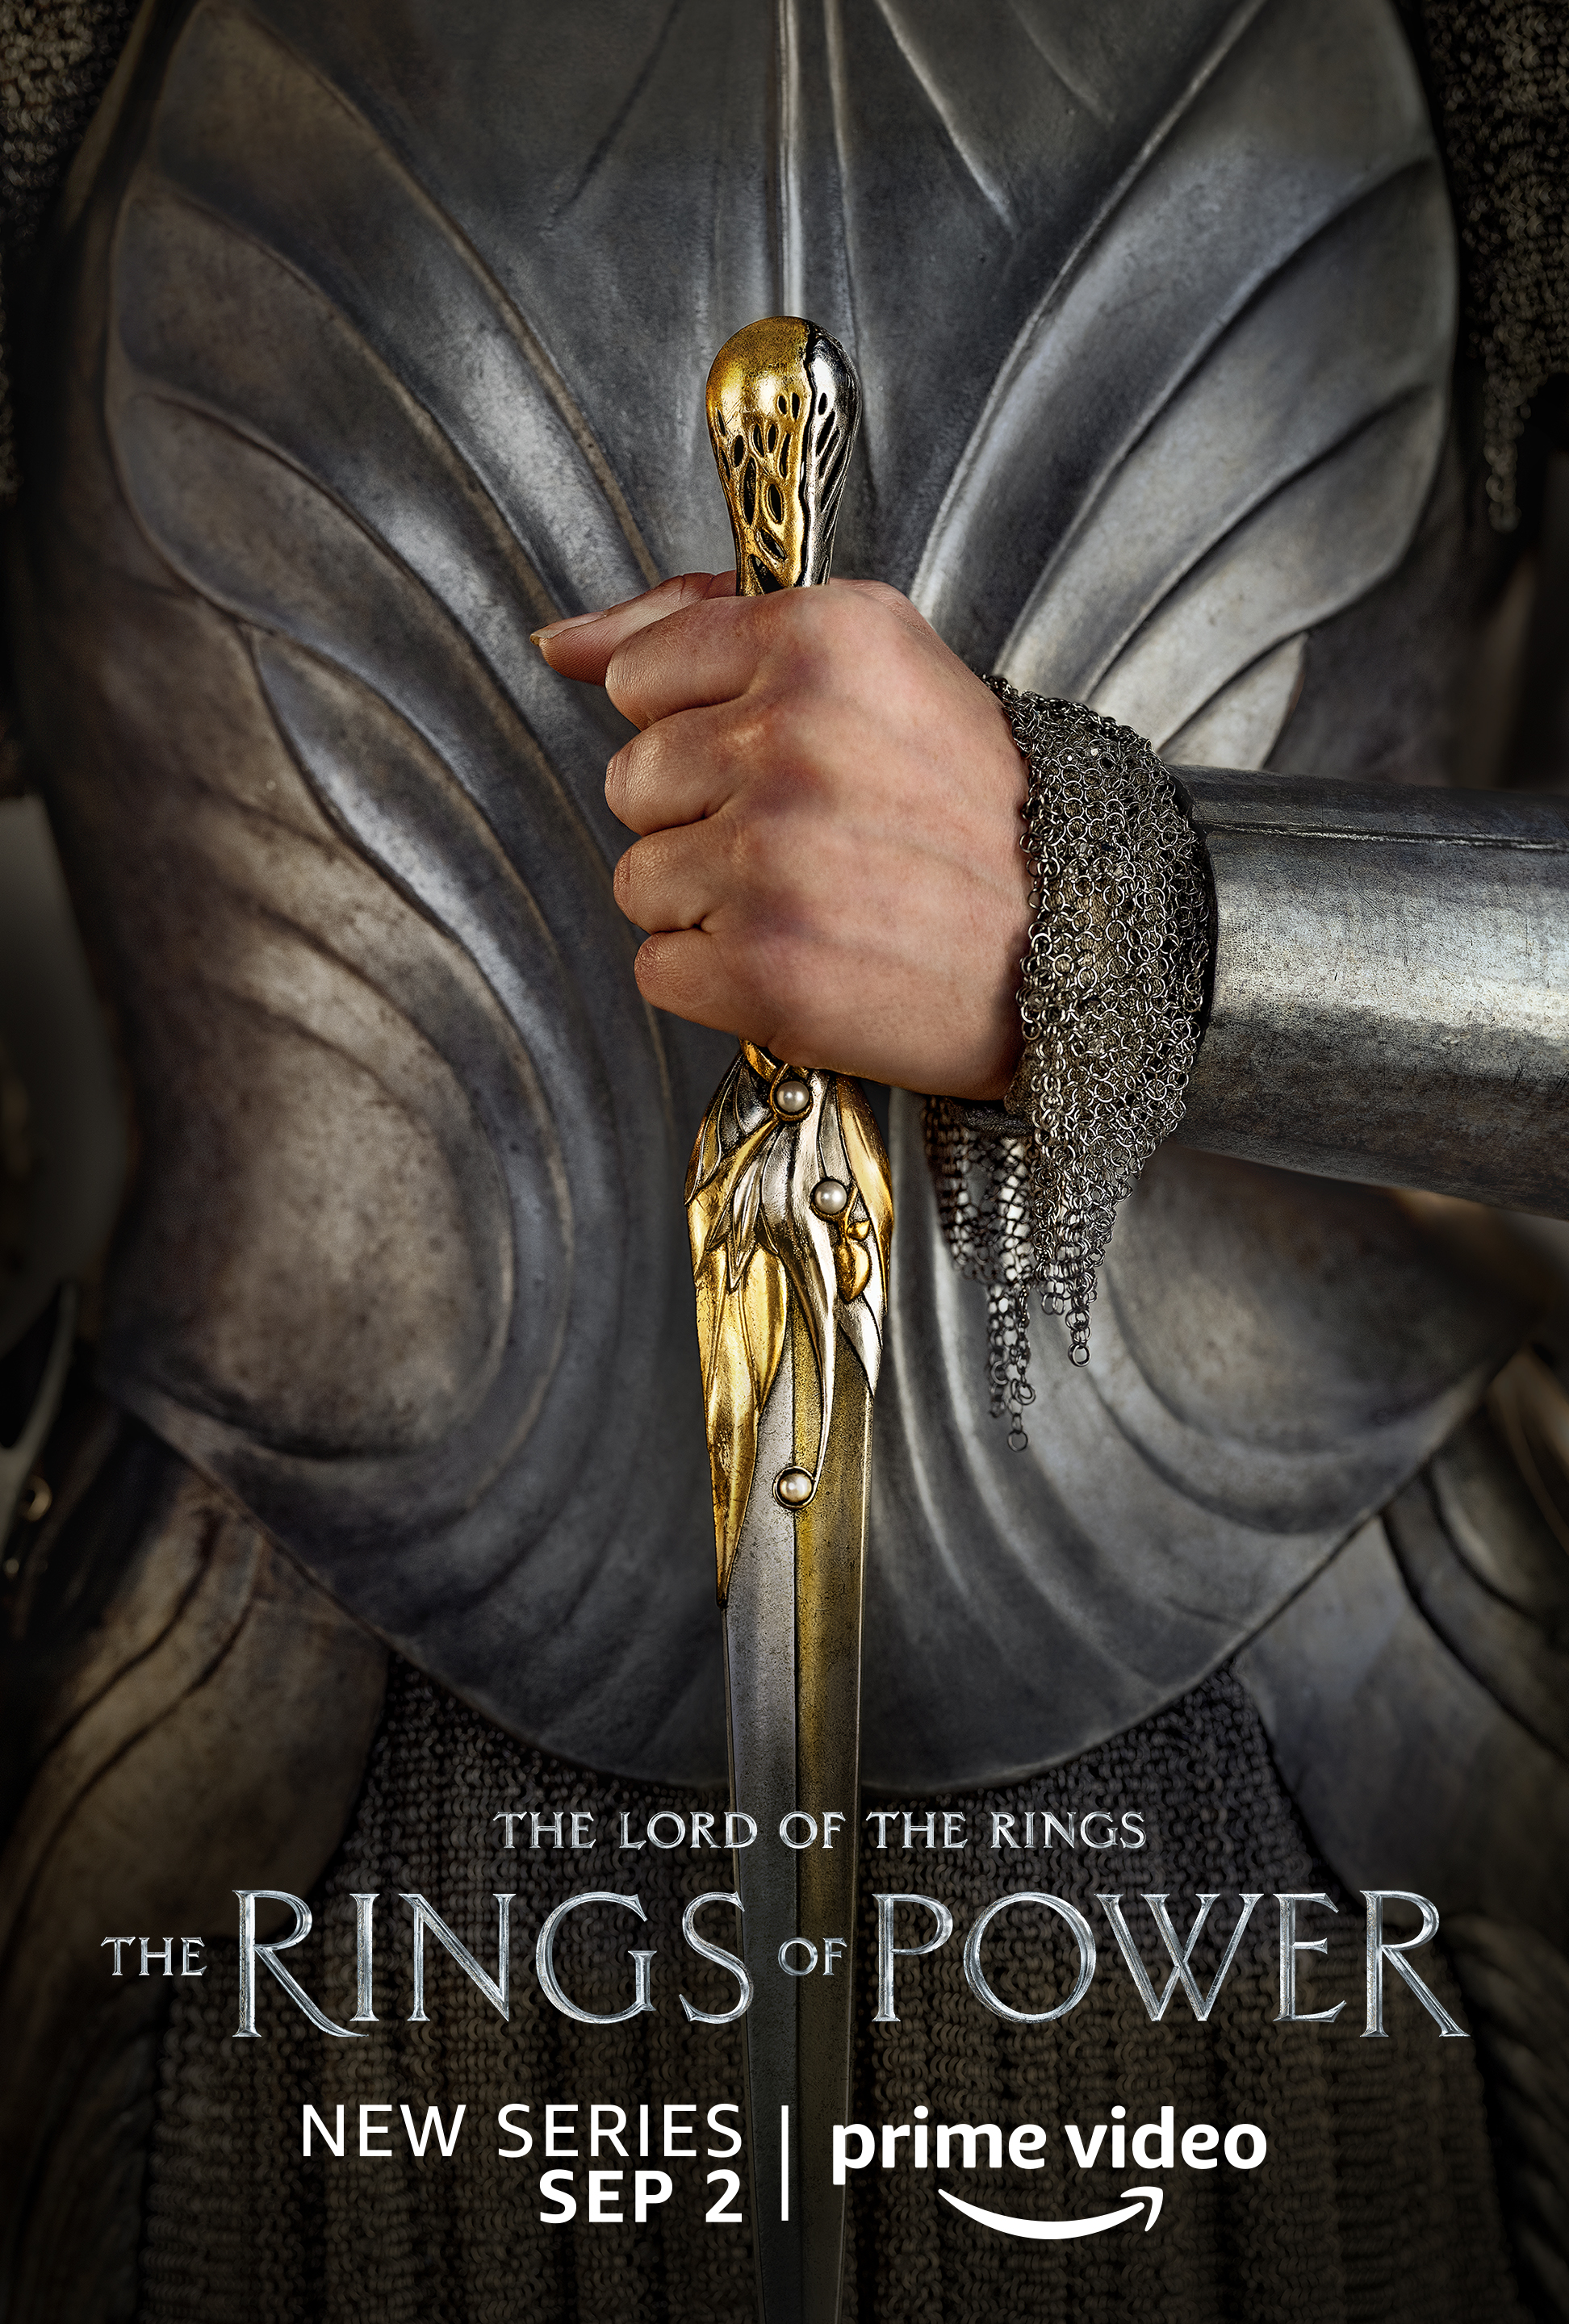 Rings of Power is now the most popular show on both IMDb and